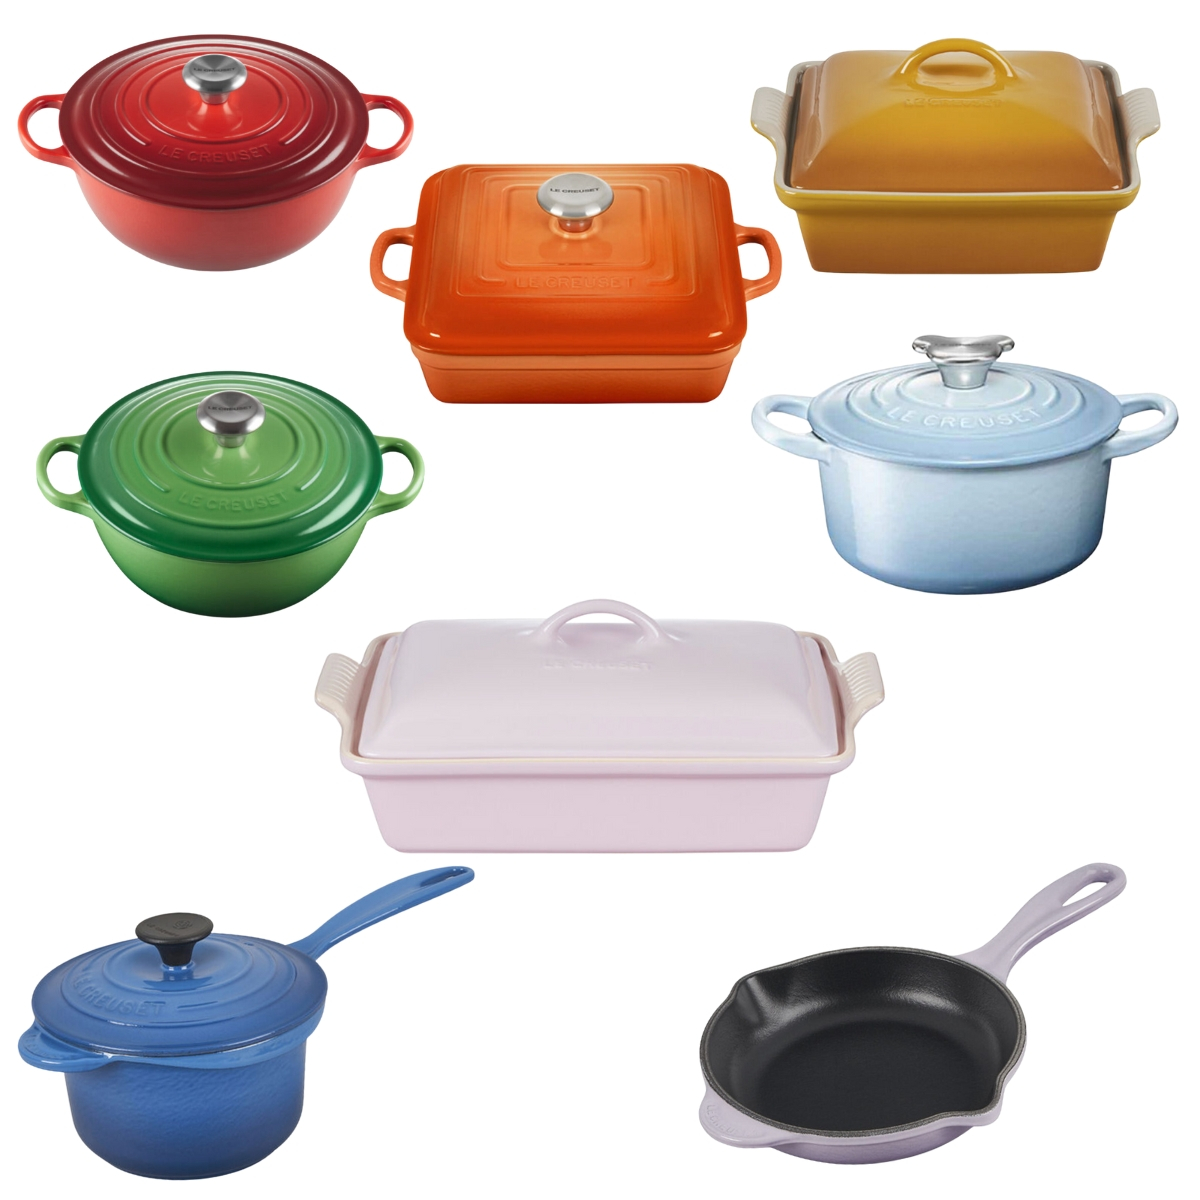 Le Creuset's most coveted cookware is up to 50% off right now